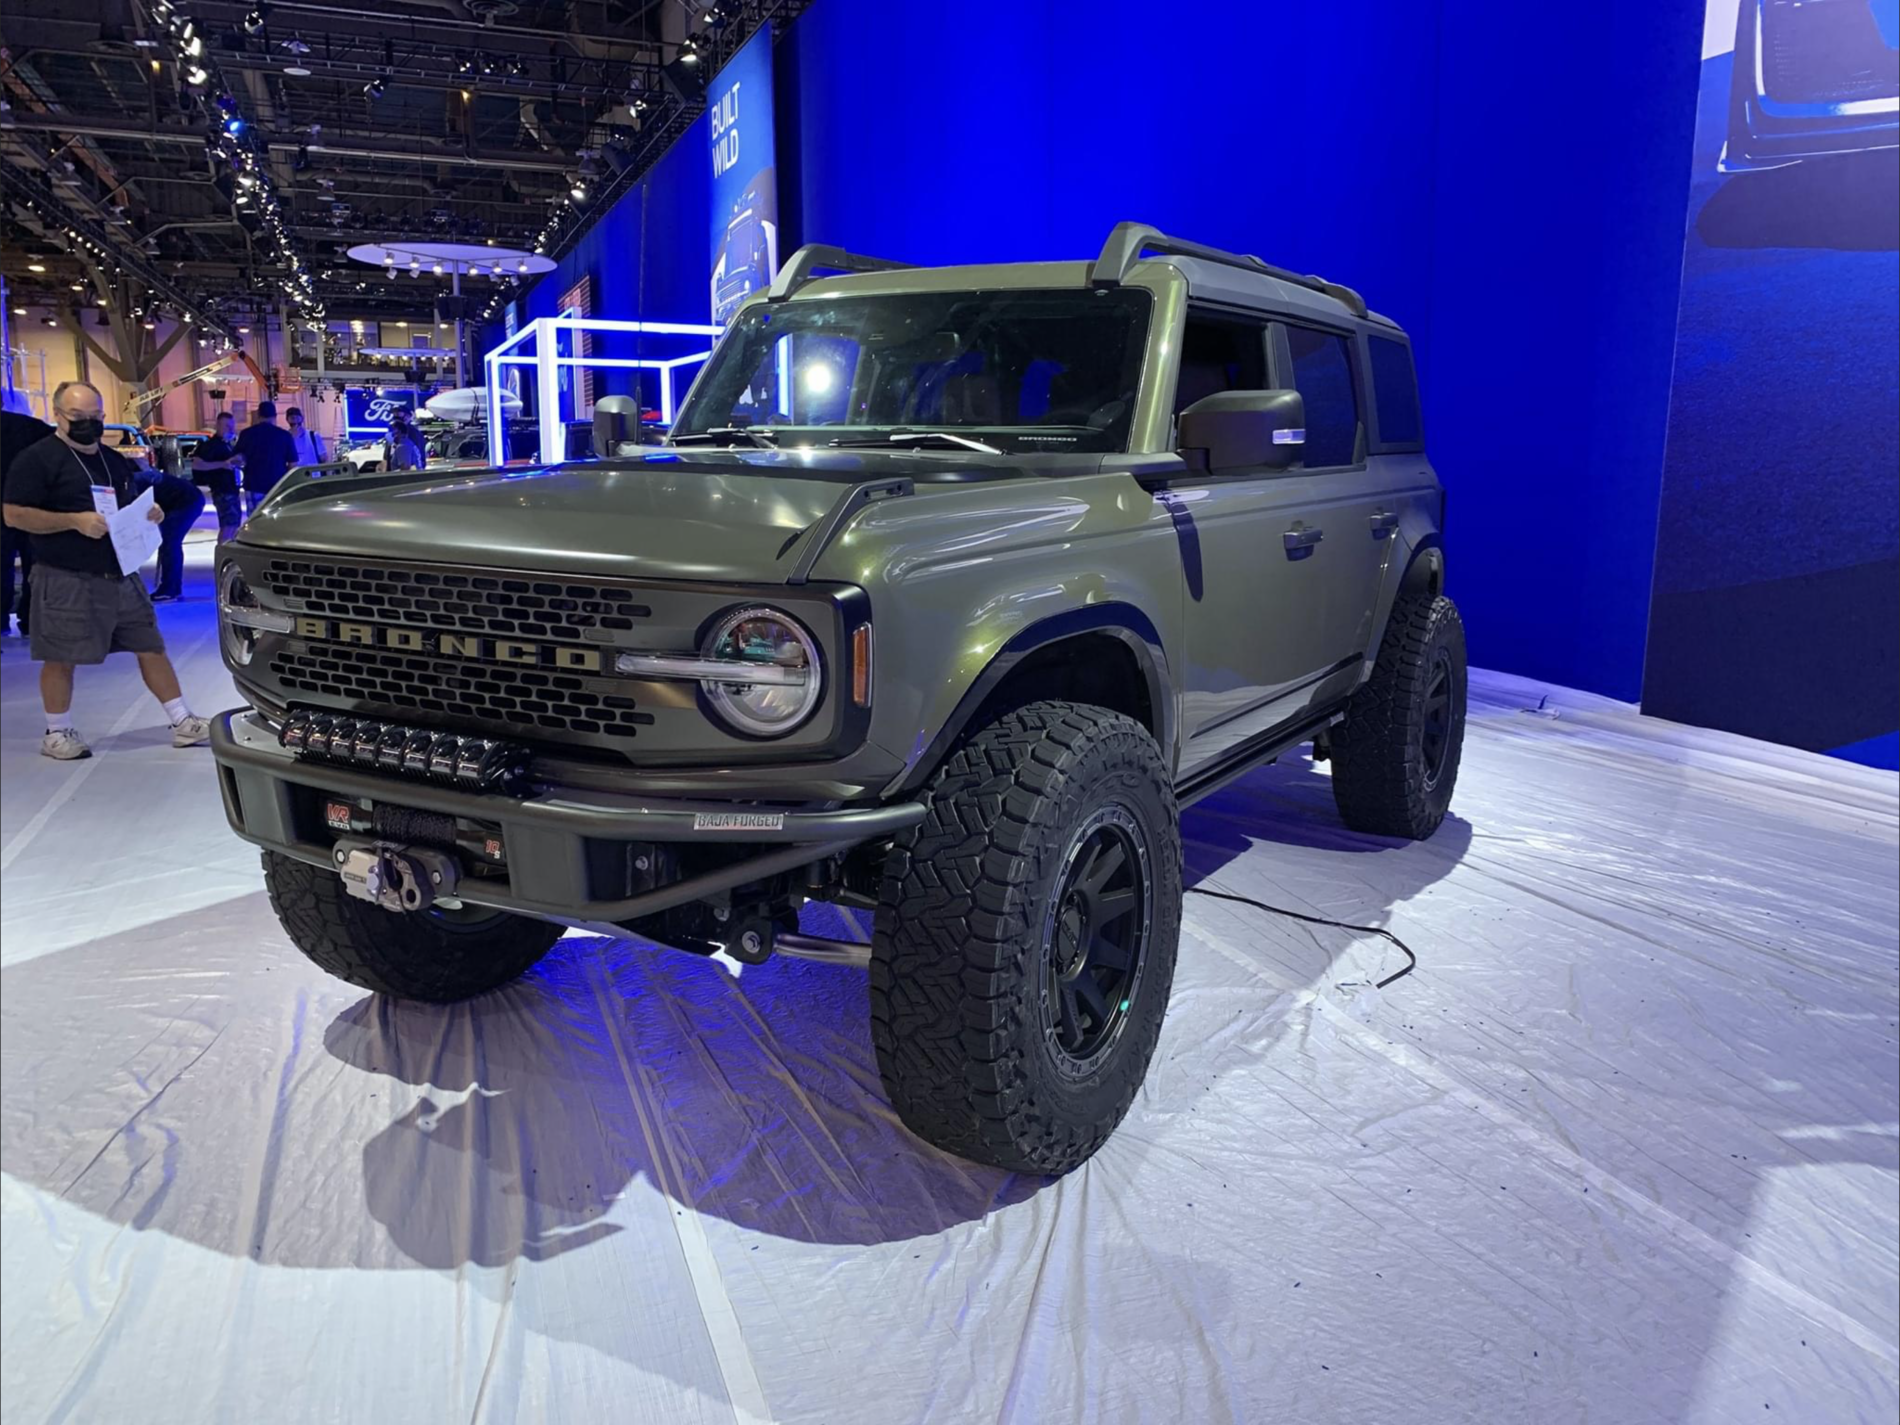 Ford Bronco Pics of (almost) all the SEMA Broncos In One Thread 16D05EA6-0F3A-496F-B6EF-BEE8C0961231